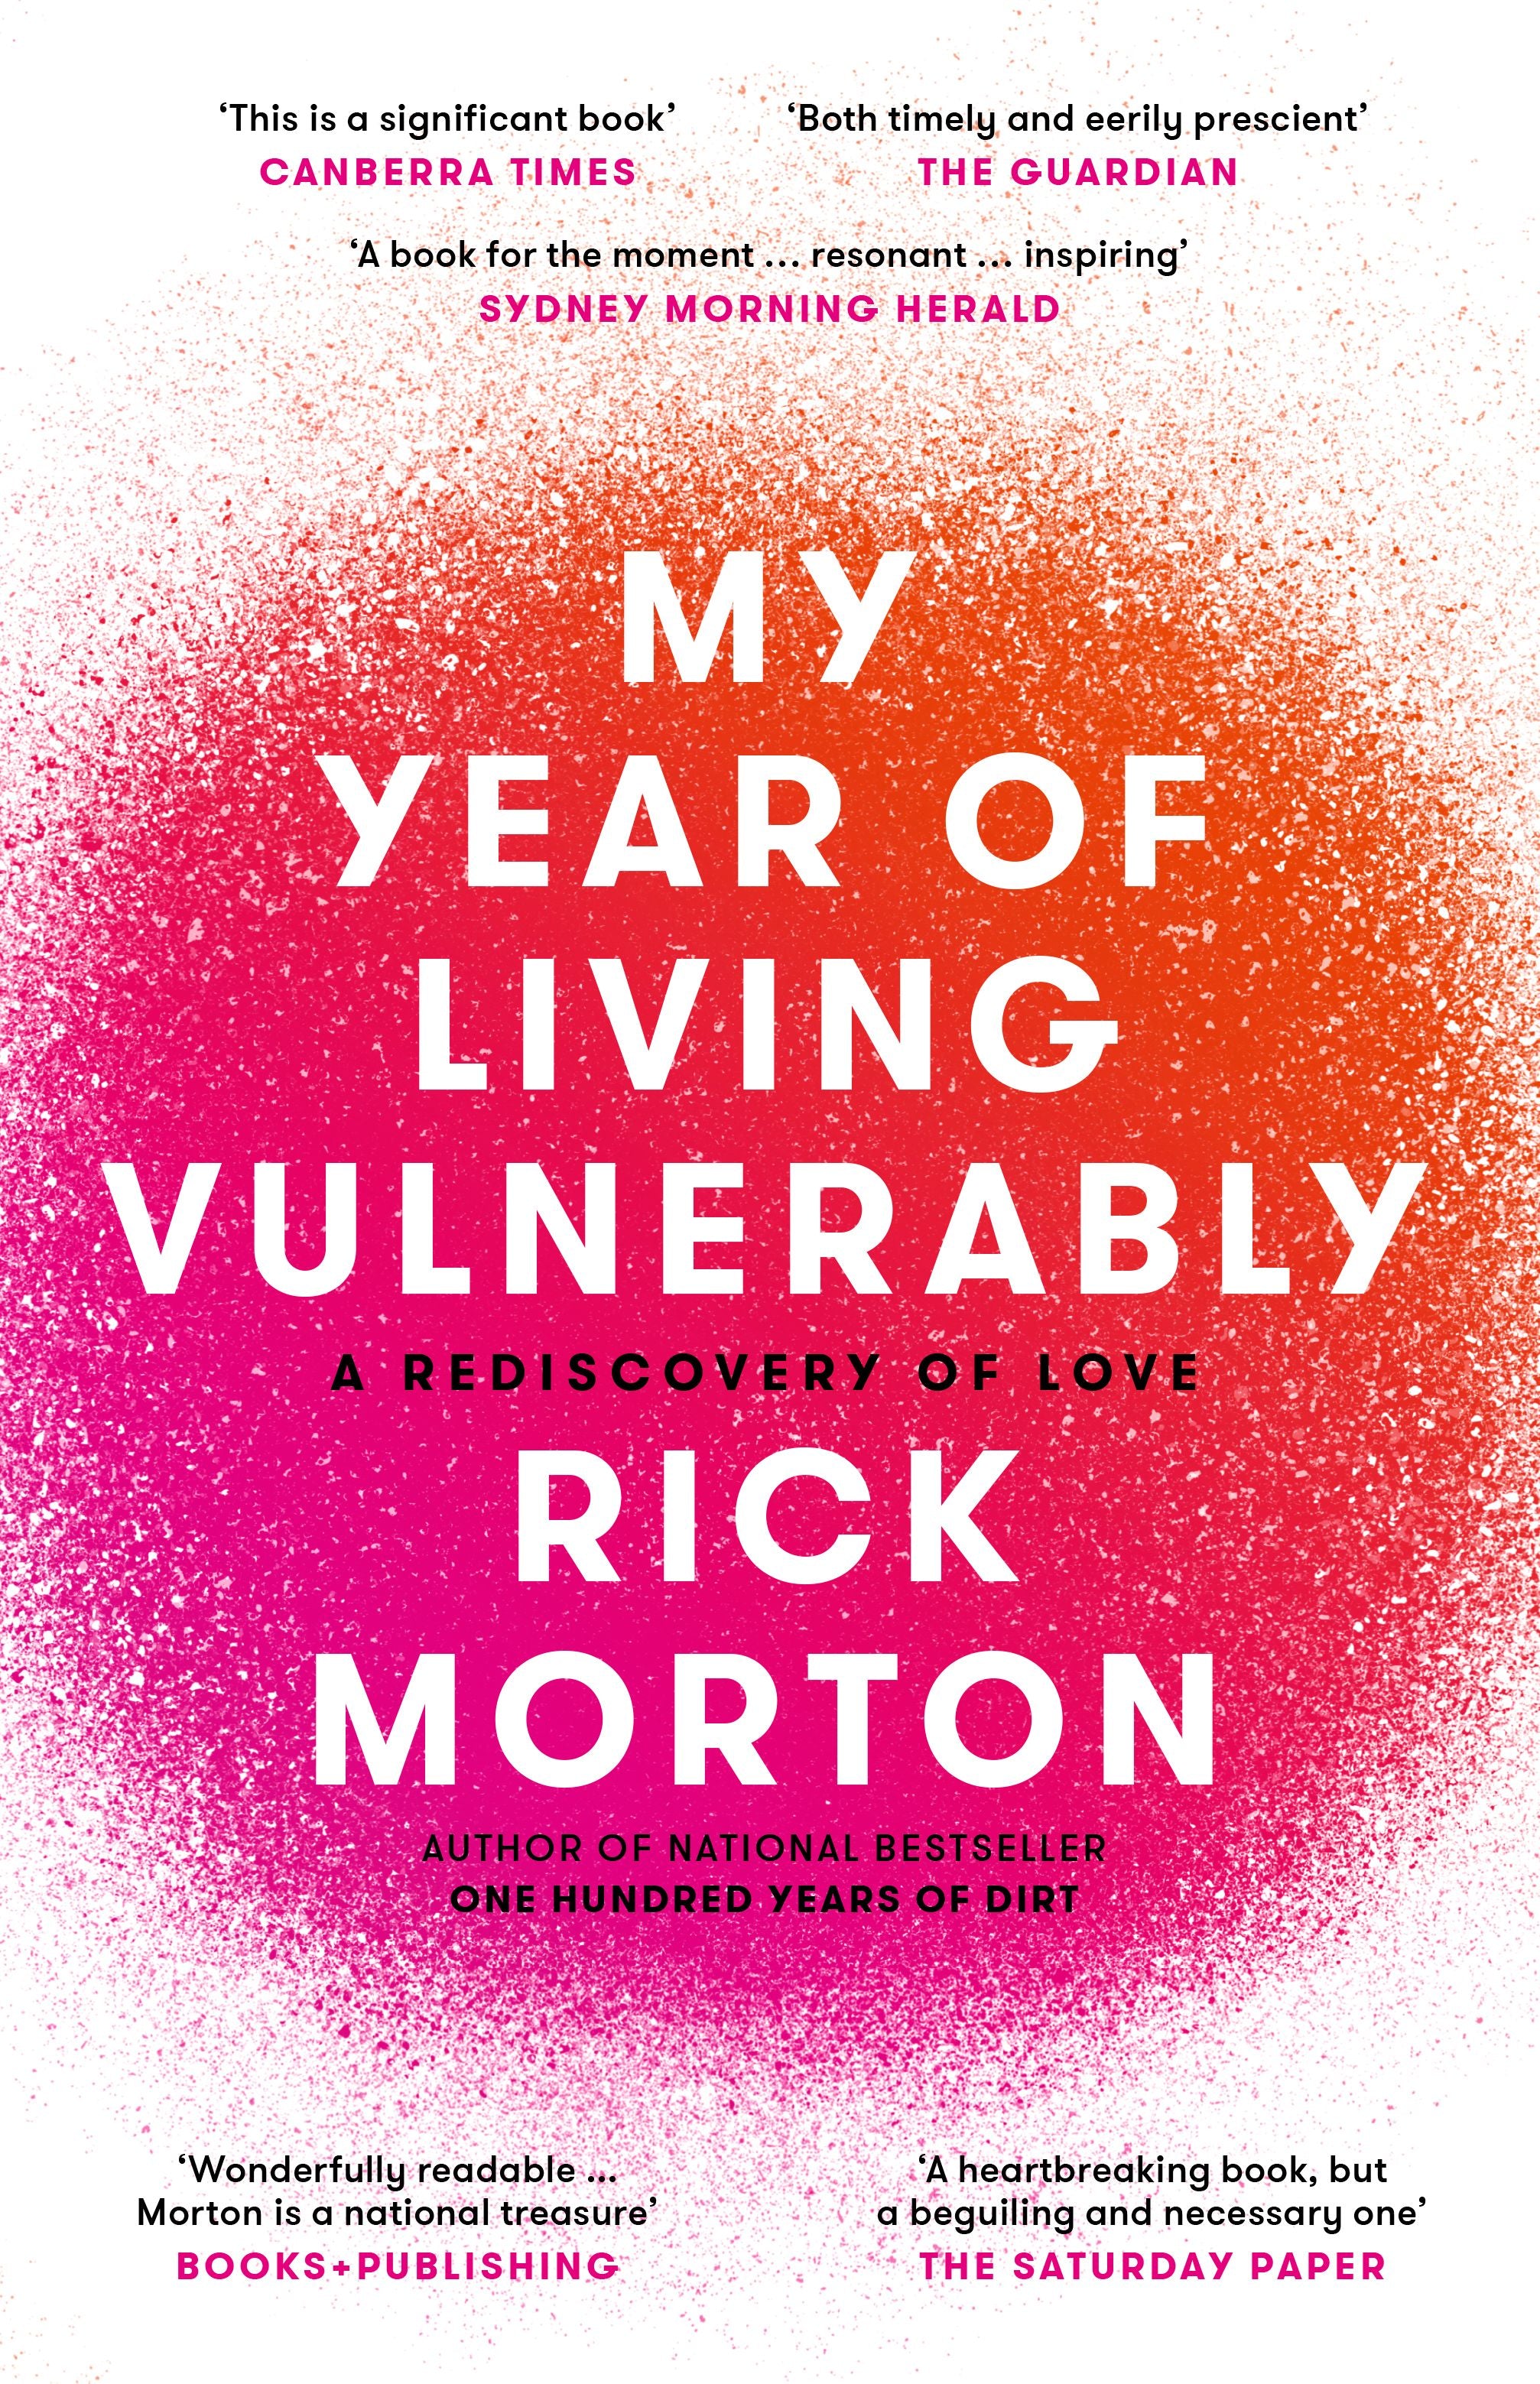 My year of living vulnerably by Rick Morton